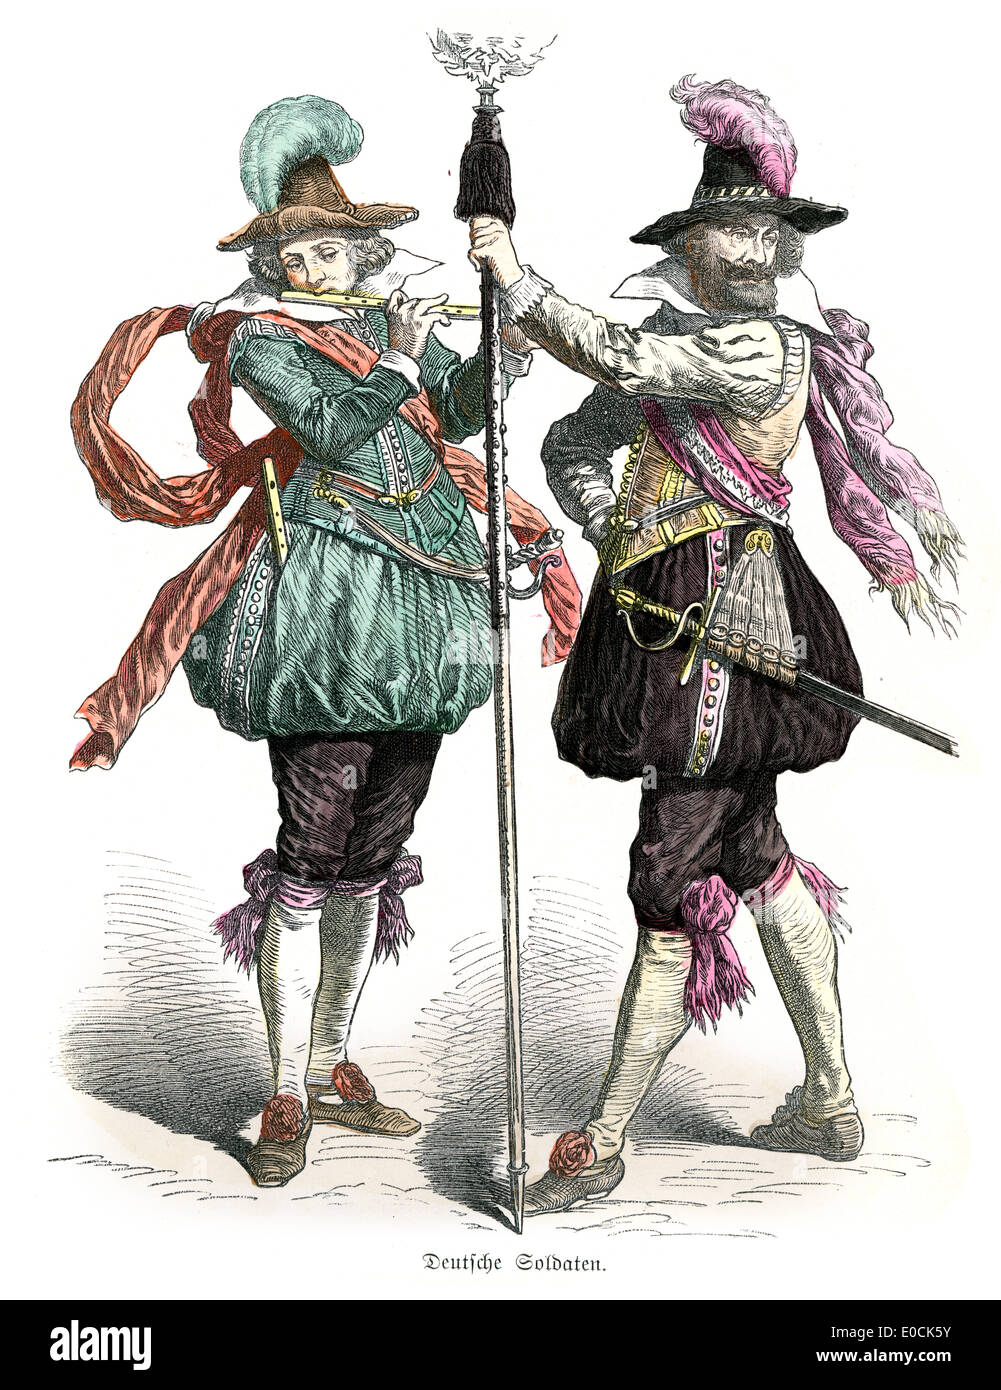 German soldiers from the 17th Century Stock Photo